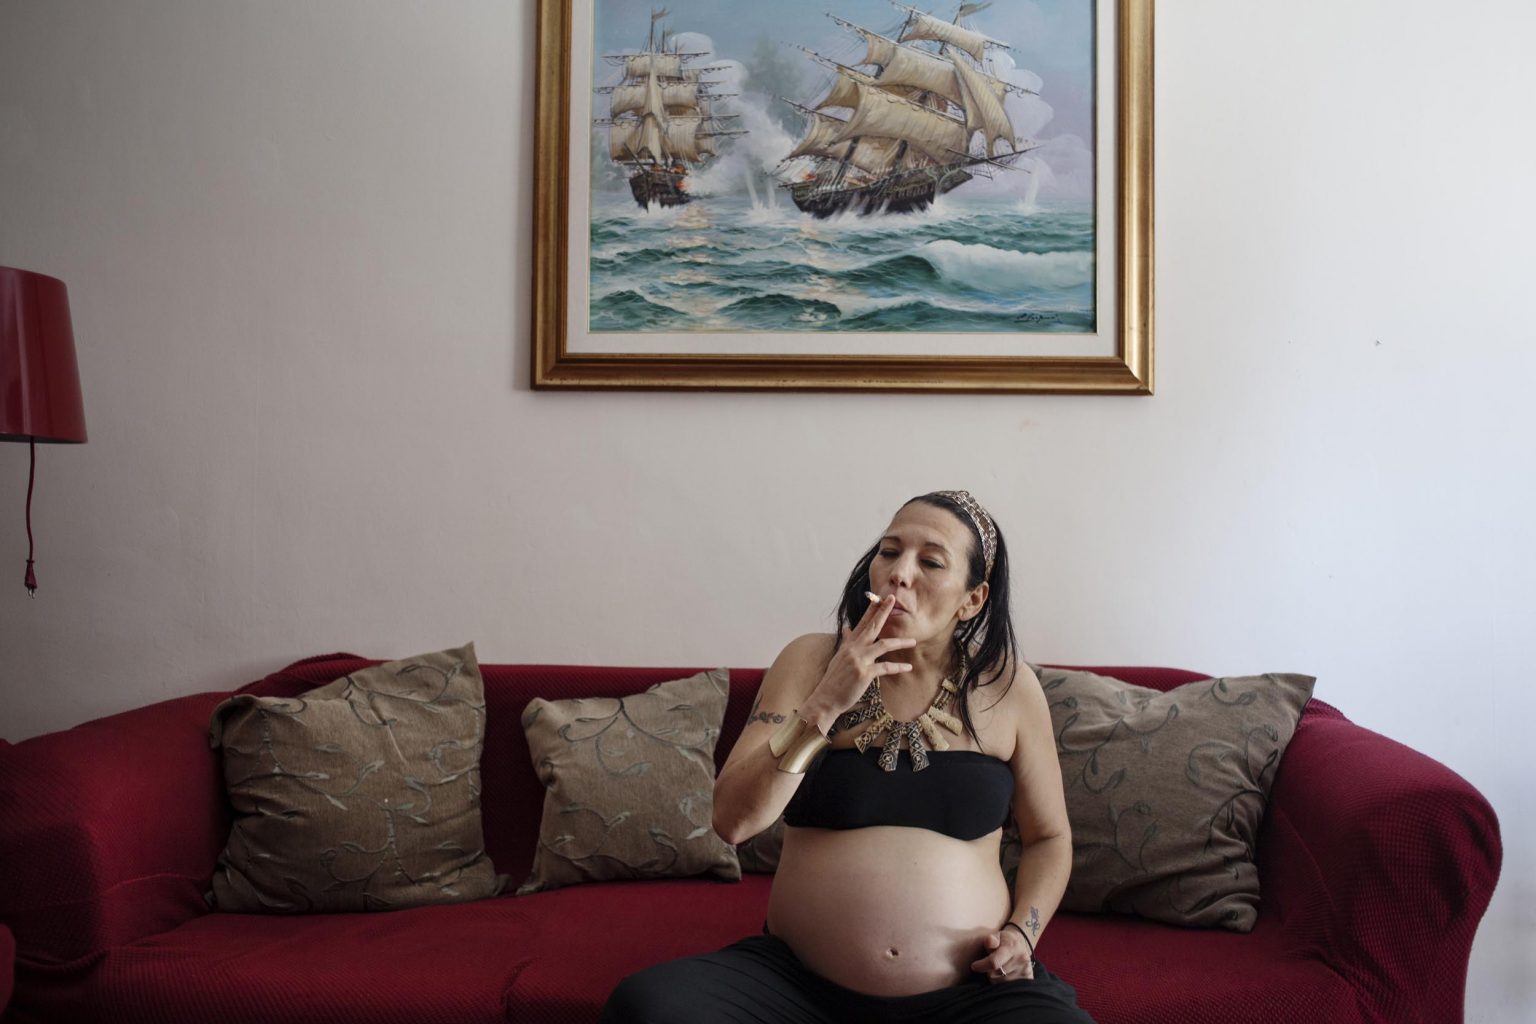 Claudia is eight month pregnant from Emiliano and feels very nervous about having a child from him. Their relationship is violent and unstable.